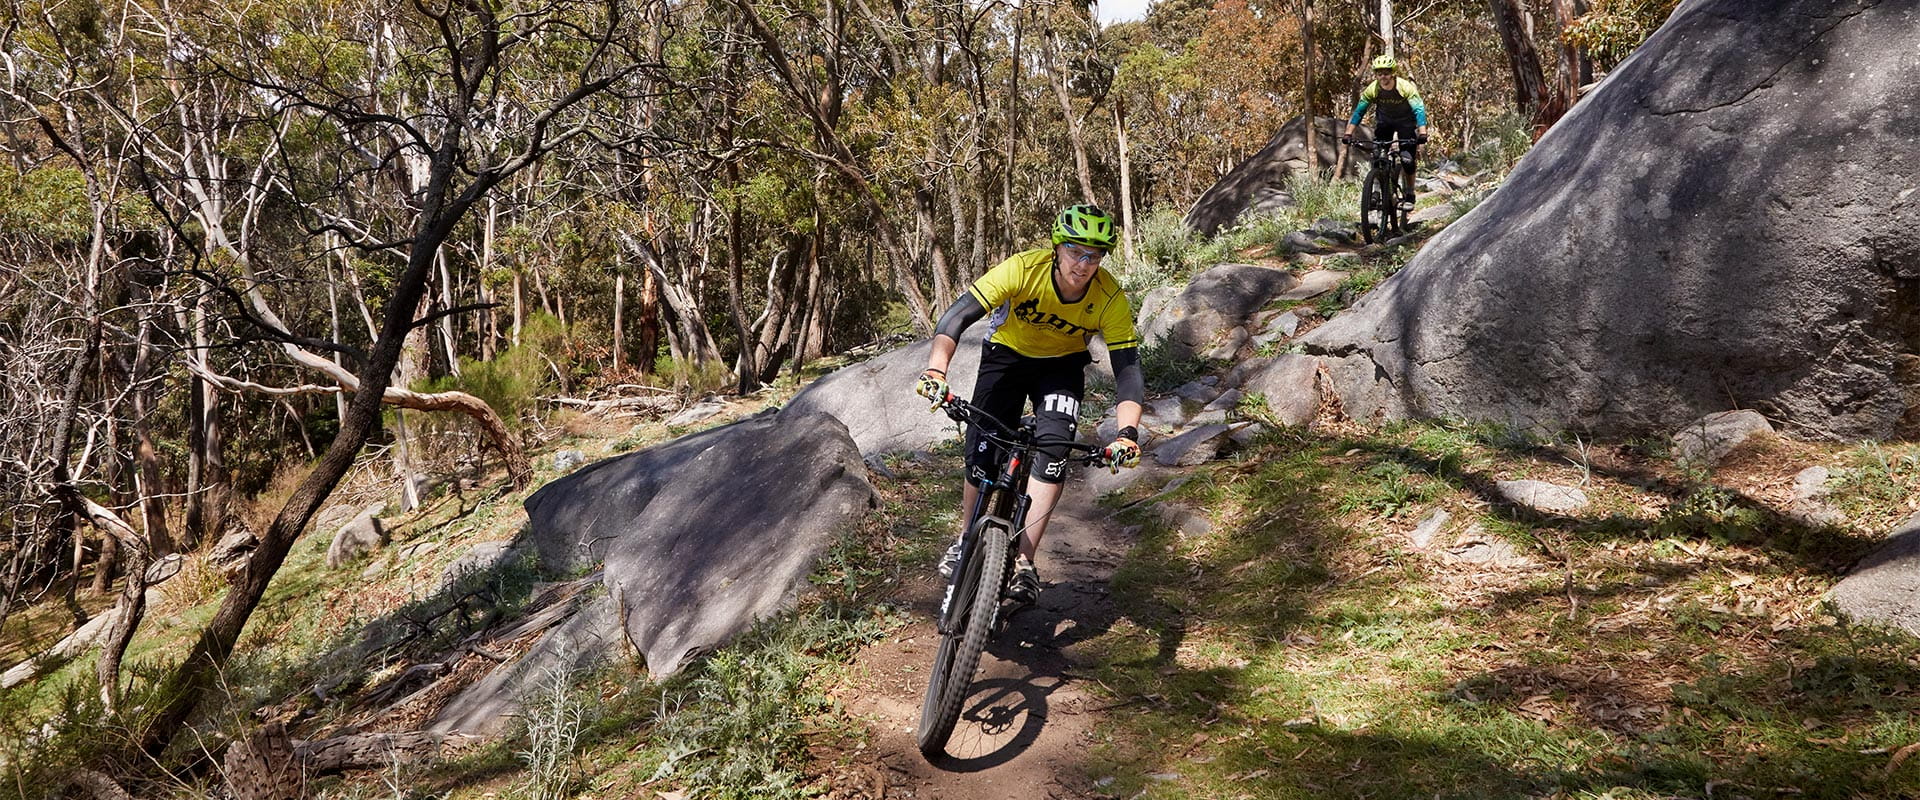 A mountain-biker wearing a helmet and cycling attire rides his mountain bike along a dirt track between boulders, with another cyclist further behind on the trail.